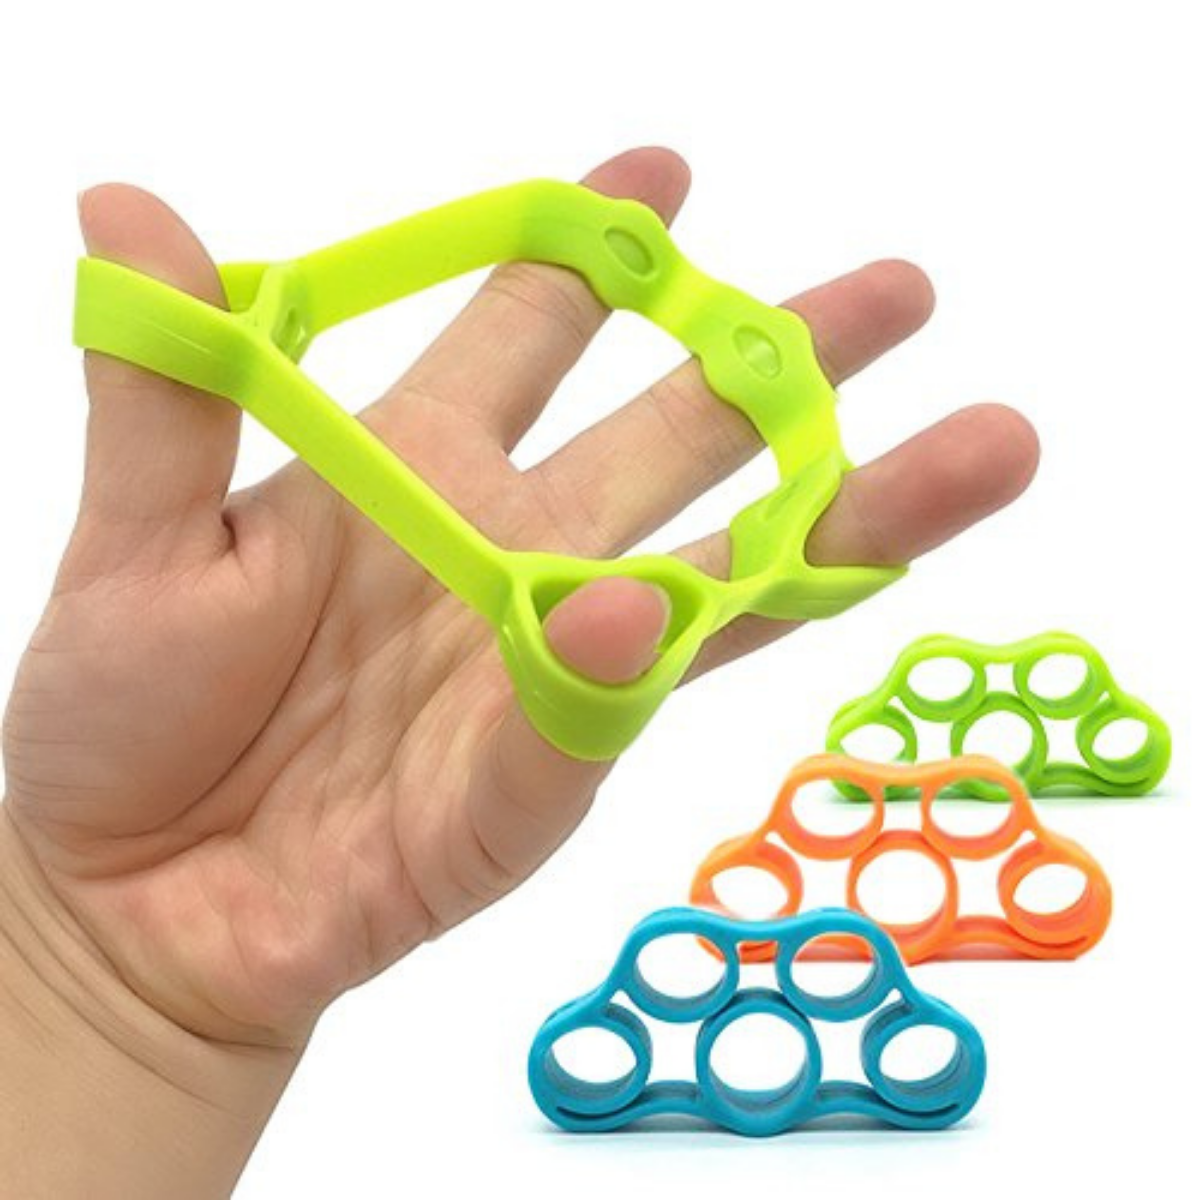 bob and brad  brad and bob resistance bands  fidget stretch  fidgets  finger bands  finger resistance band  finger trainer  grip strength trainer and resistance band  grip strengthener for kids  hand exercise for  hand grips for strength training  hand strengthener kids  hand workout  trigger thumb ring gym bike pedal theraplex emollient model shark toppers celestrial buddies assist builder toolkit jawzercise air physio calm strips adhesives walley glaze bean successful work sock